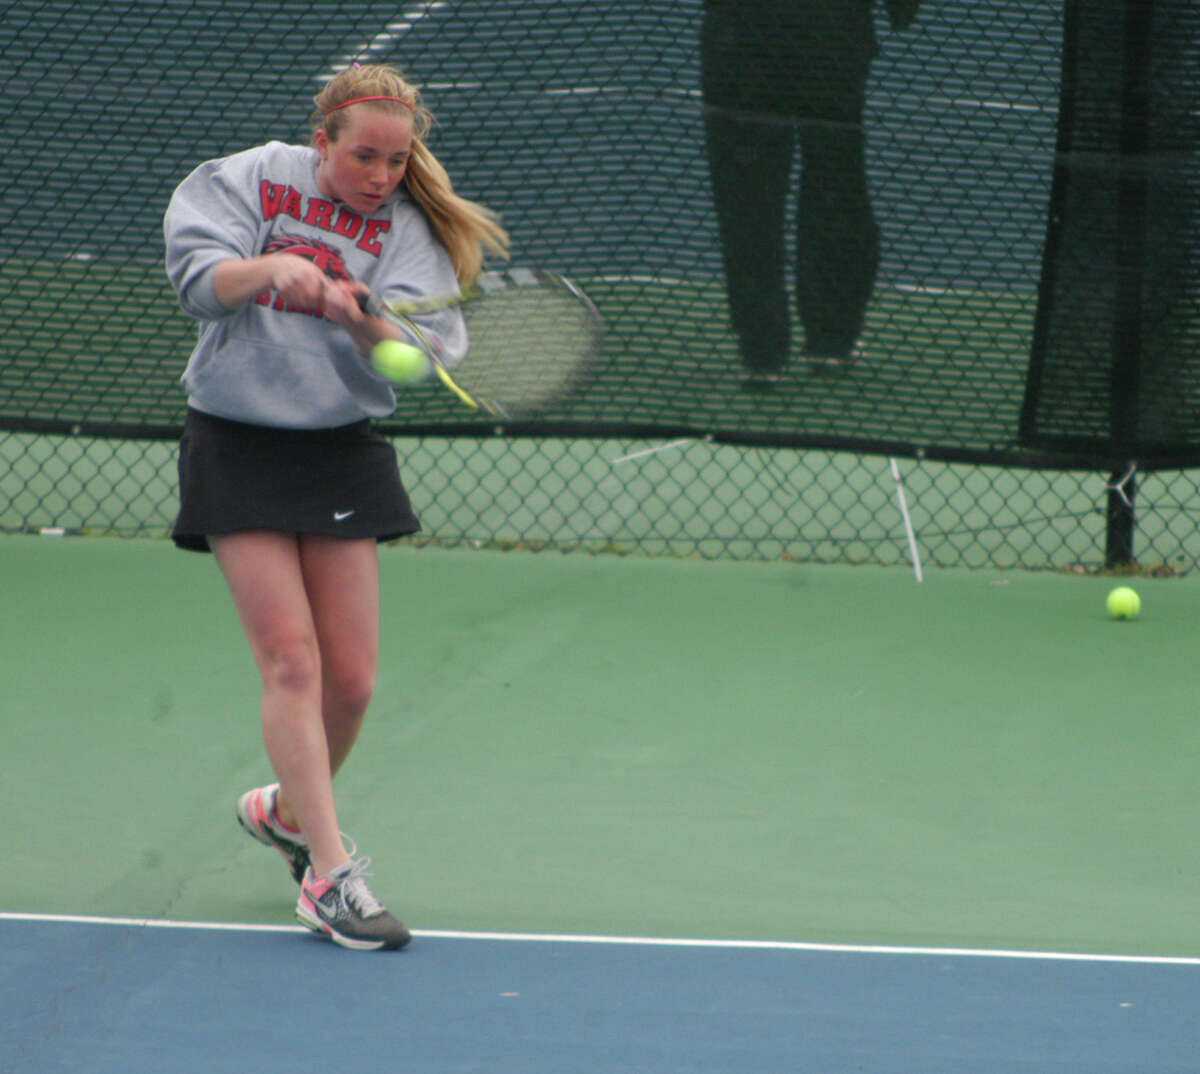 Fairfield Warde's Mackenzie Burns sends a backhand shot toward Fairfield Ludlowe's Daria Efimov on Tuesday, April 29 in an FCIAC girls tennis match at Ludlowe. Burns lost 6-3, 6-1 as the Falcons won the match 5-2 to remain undefeated.